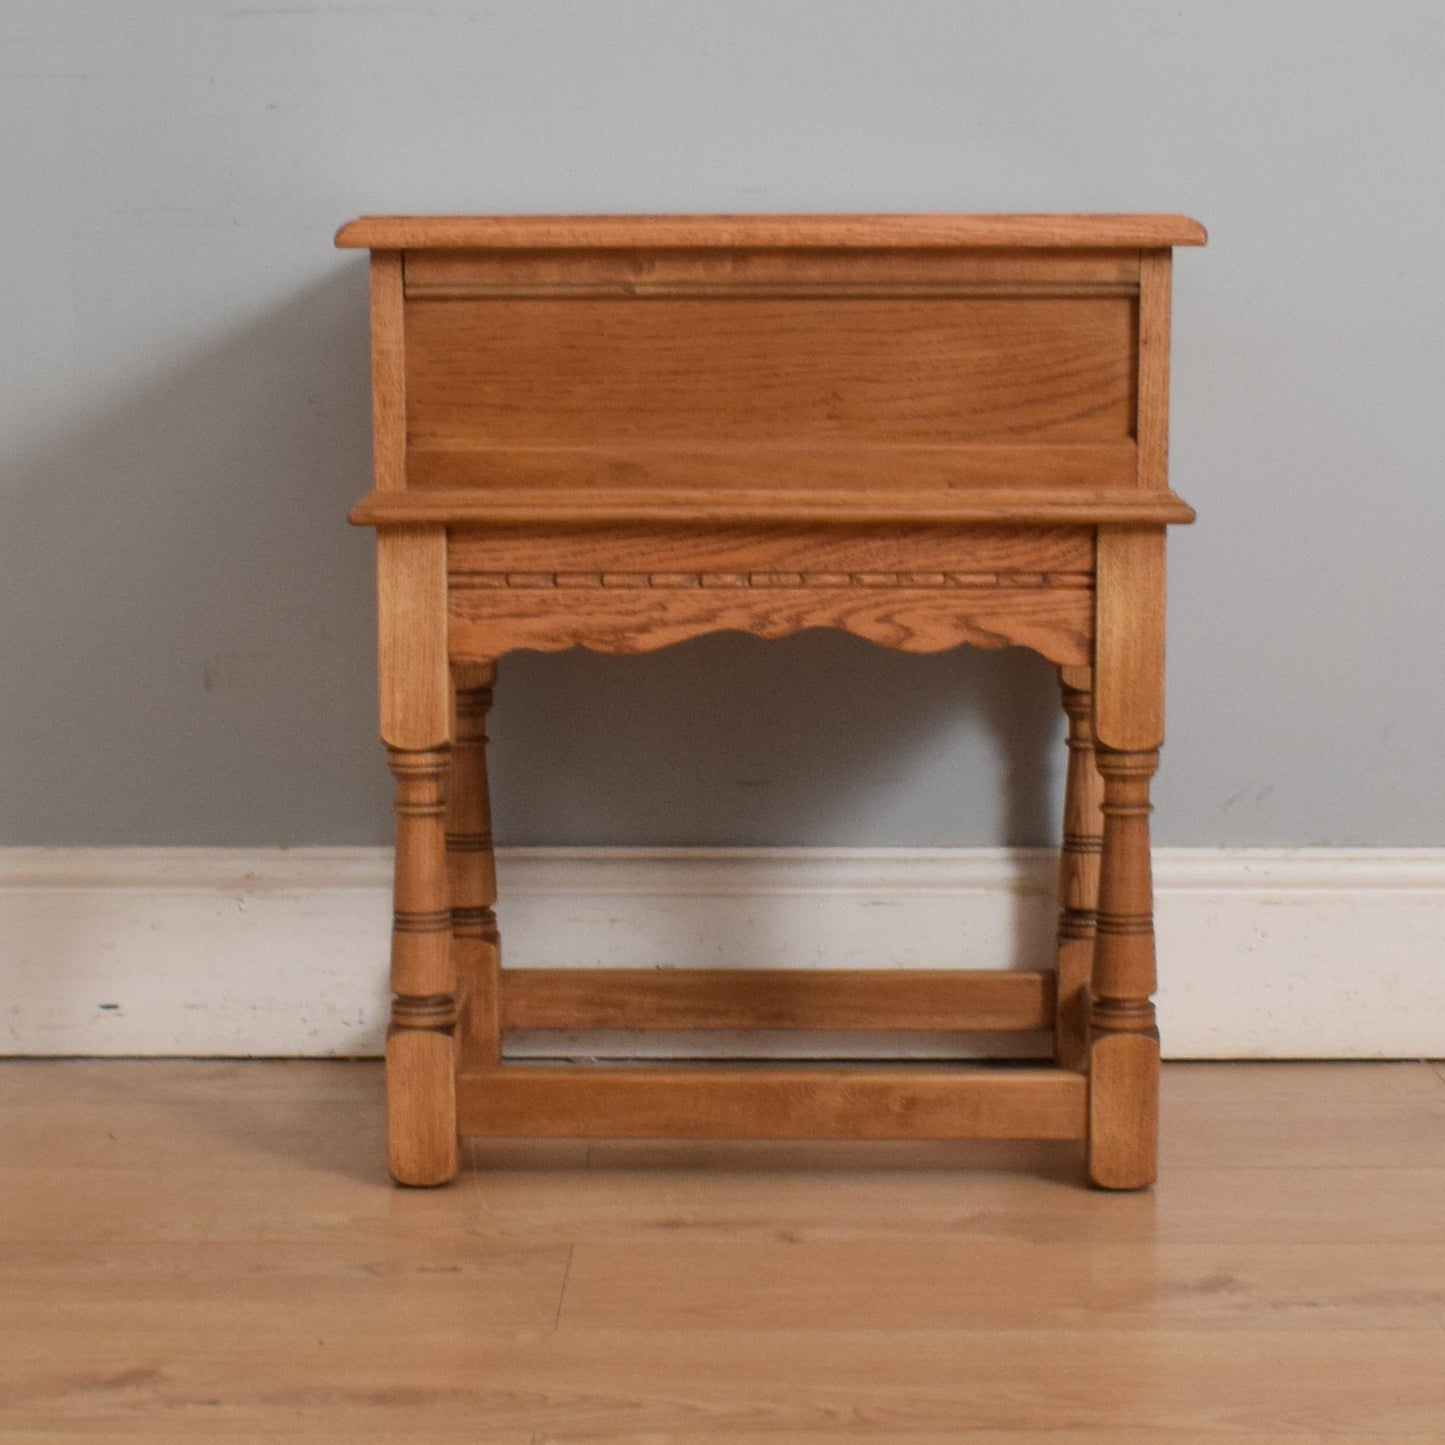 'Old Charm' Carved Side Table